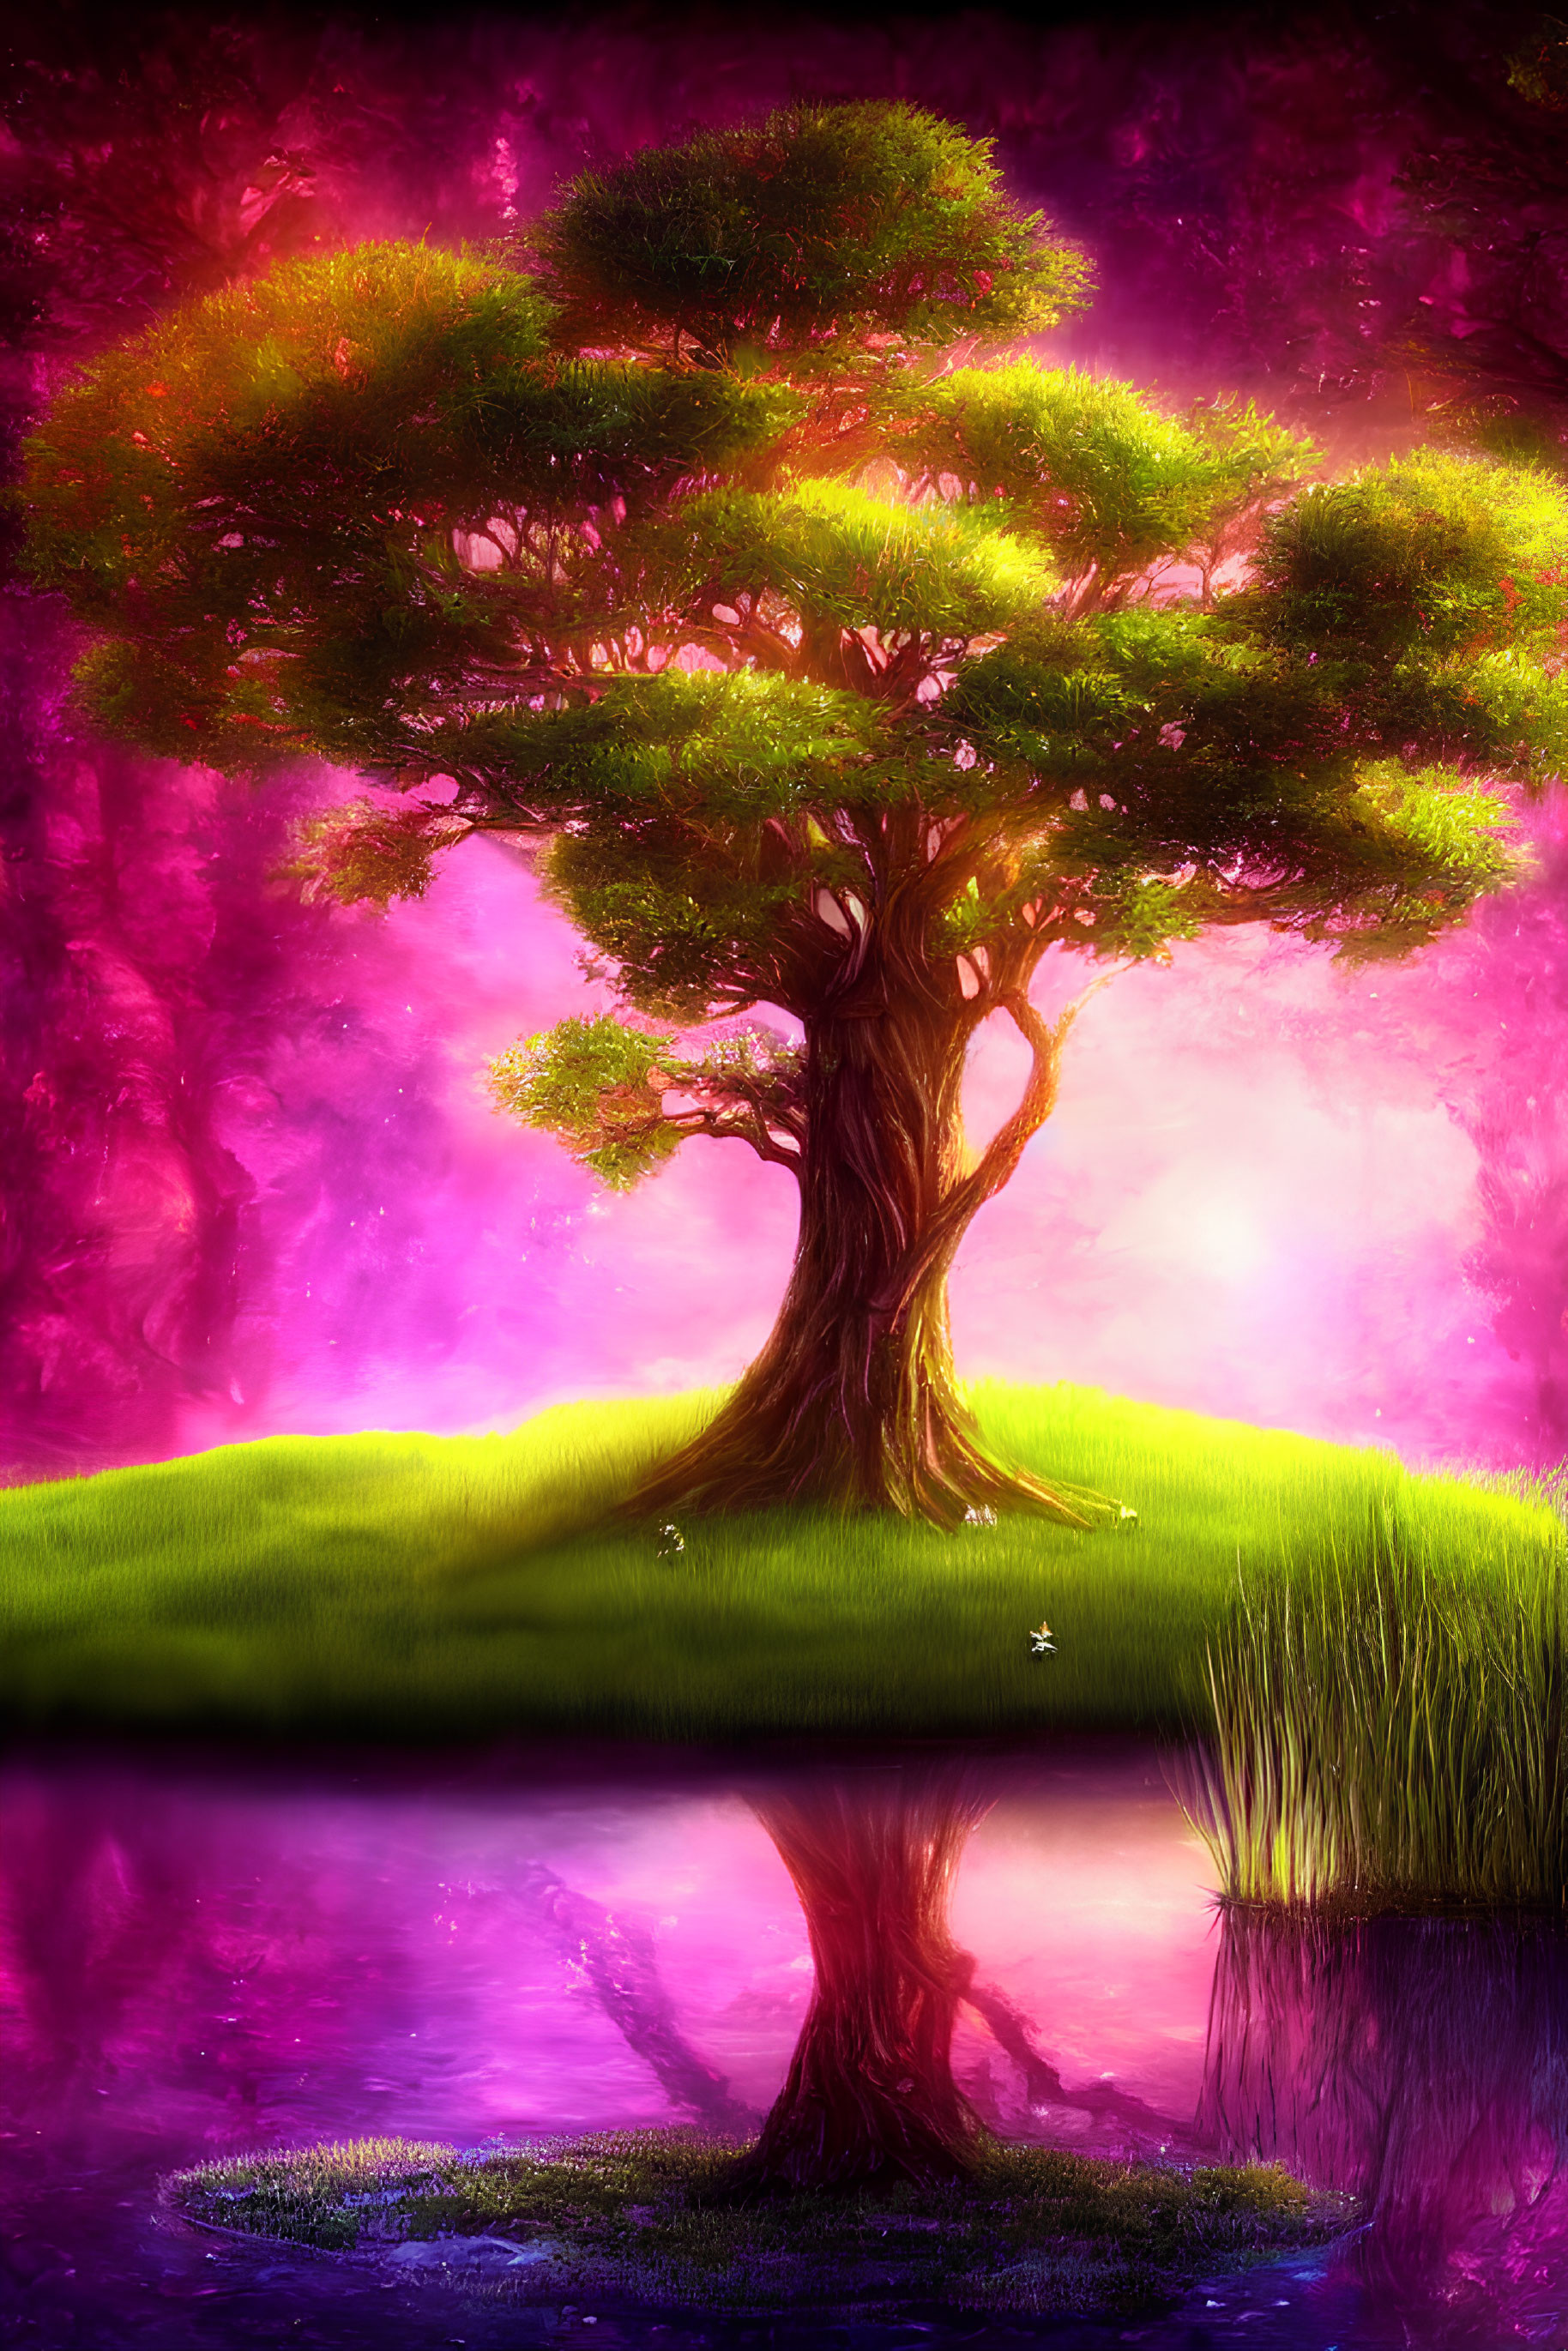 Colorful illustration: Solitary tree with lush green foliage on grassy bank, reflected in purple water